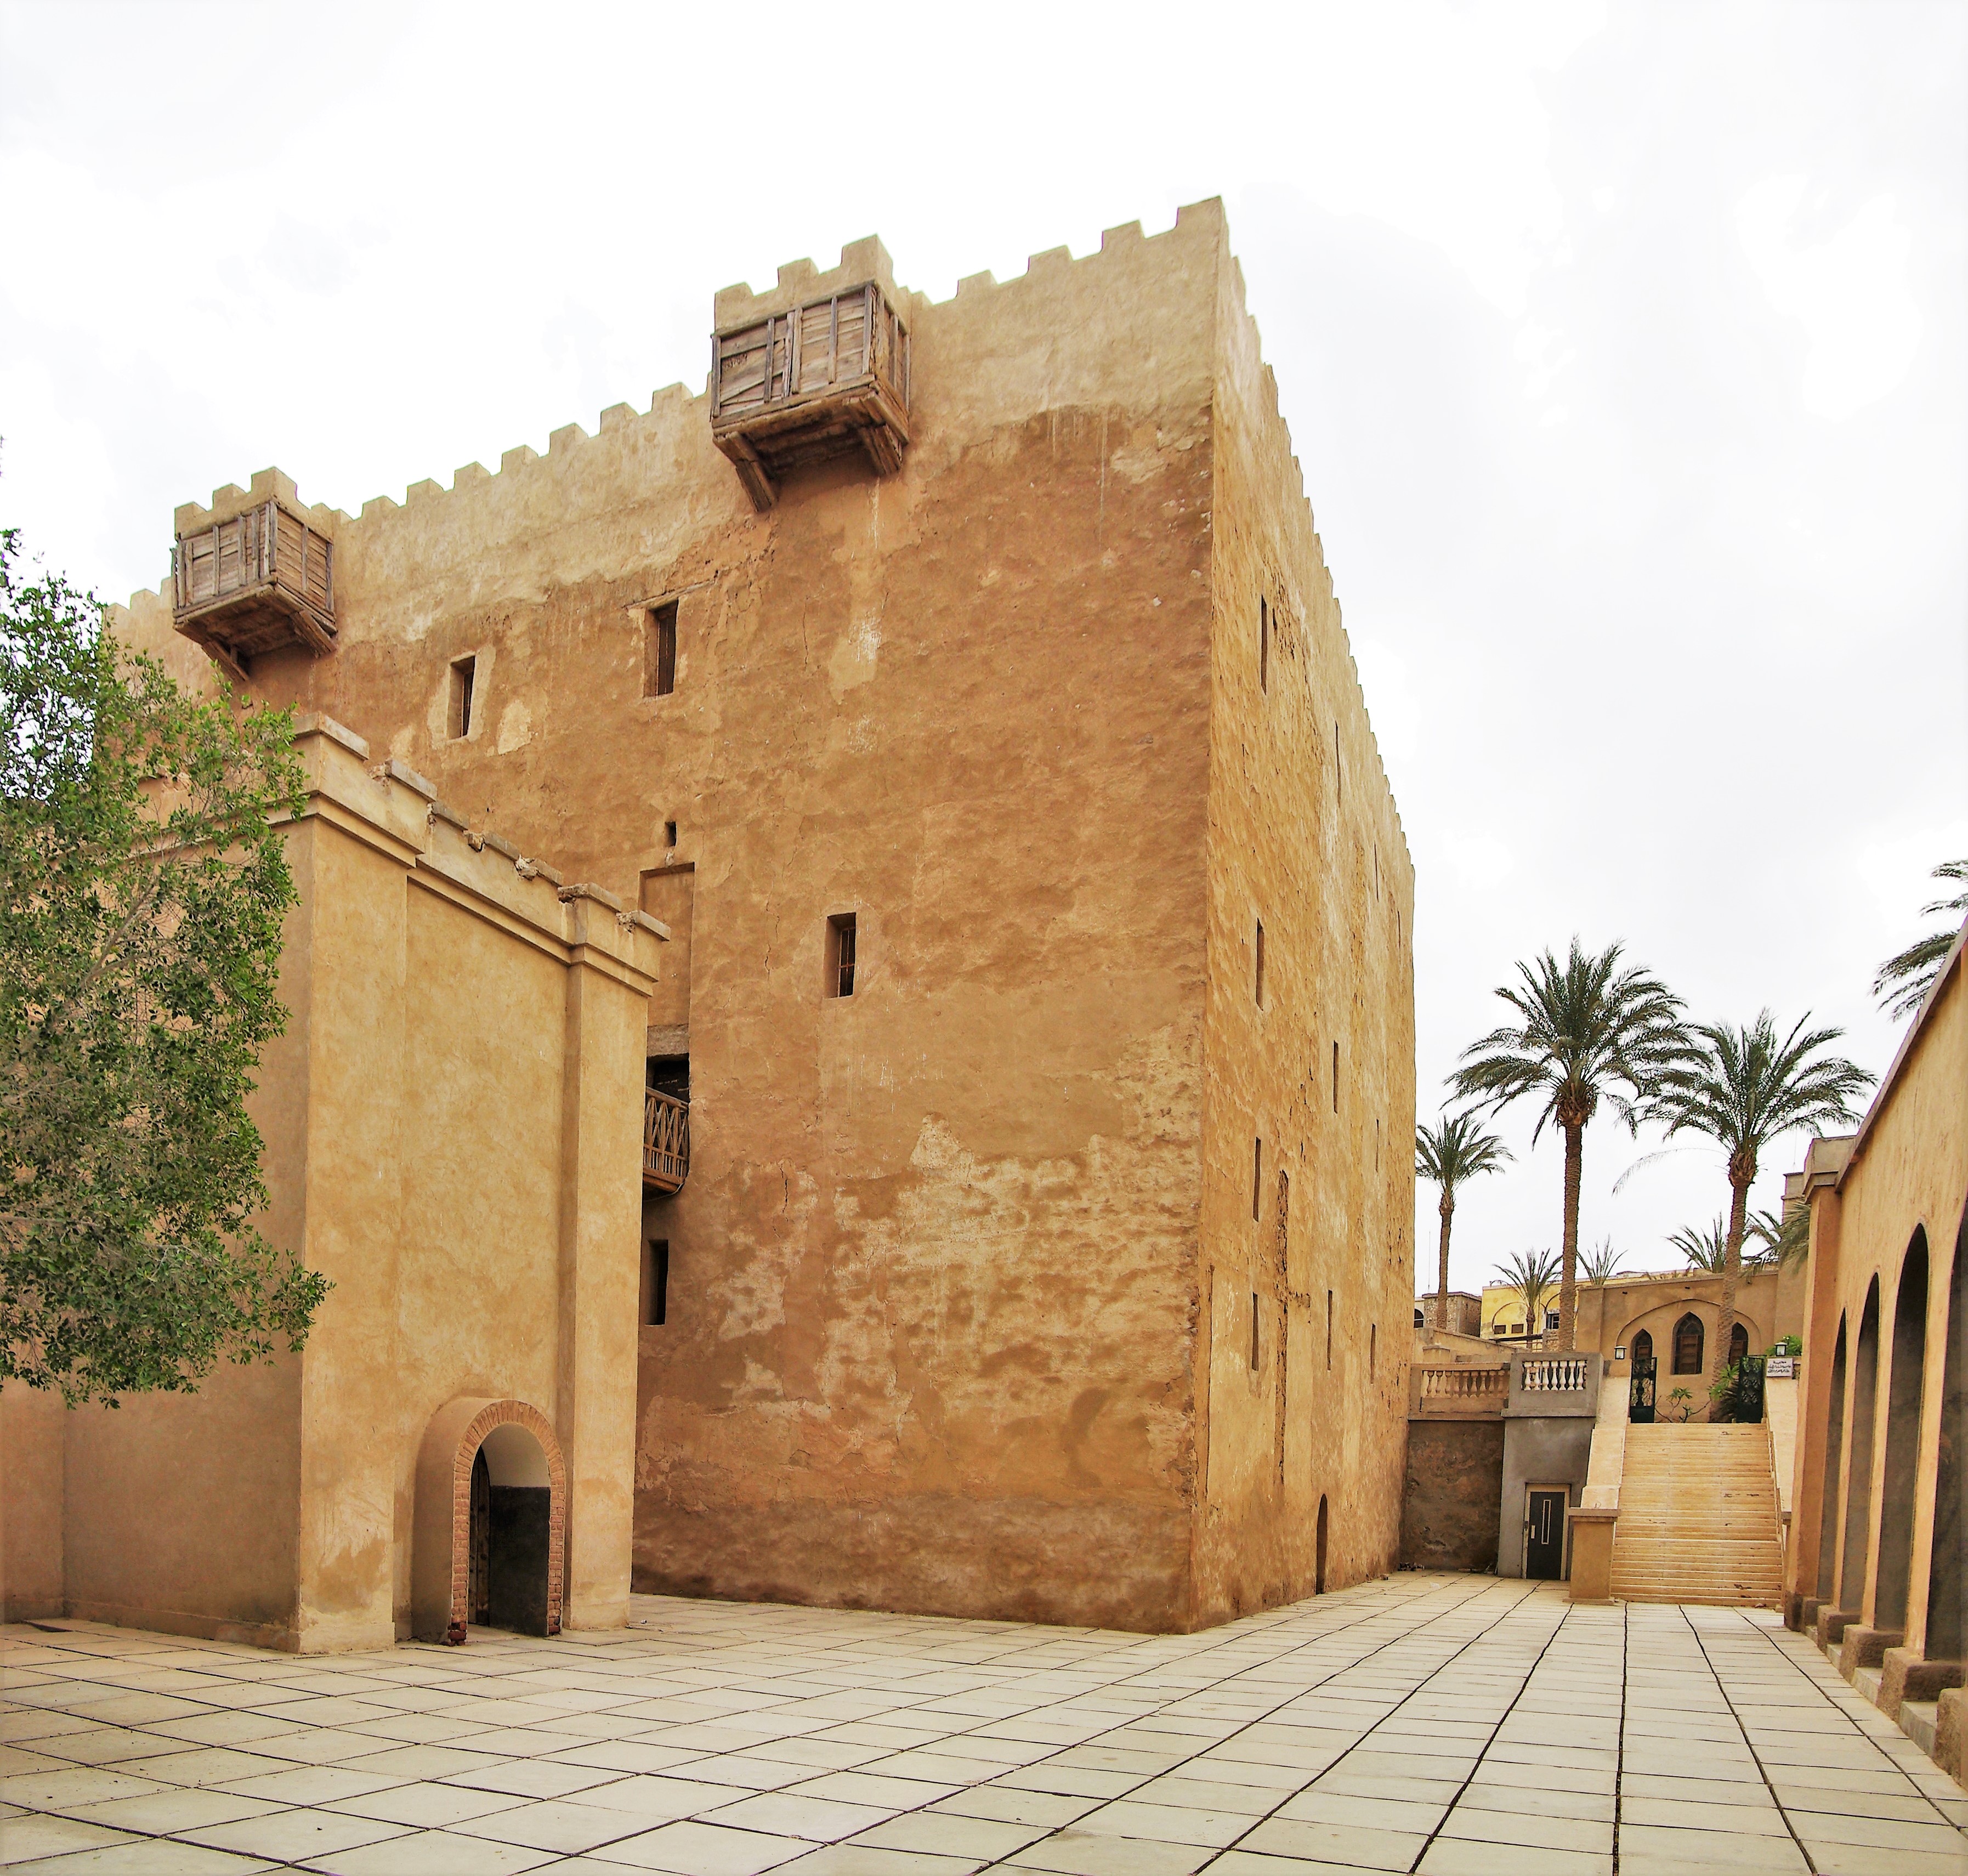 Fortress in St. Macarius Monastery, which is located in Wadi El-Natroun, Egypt.